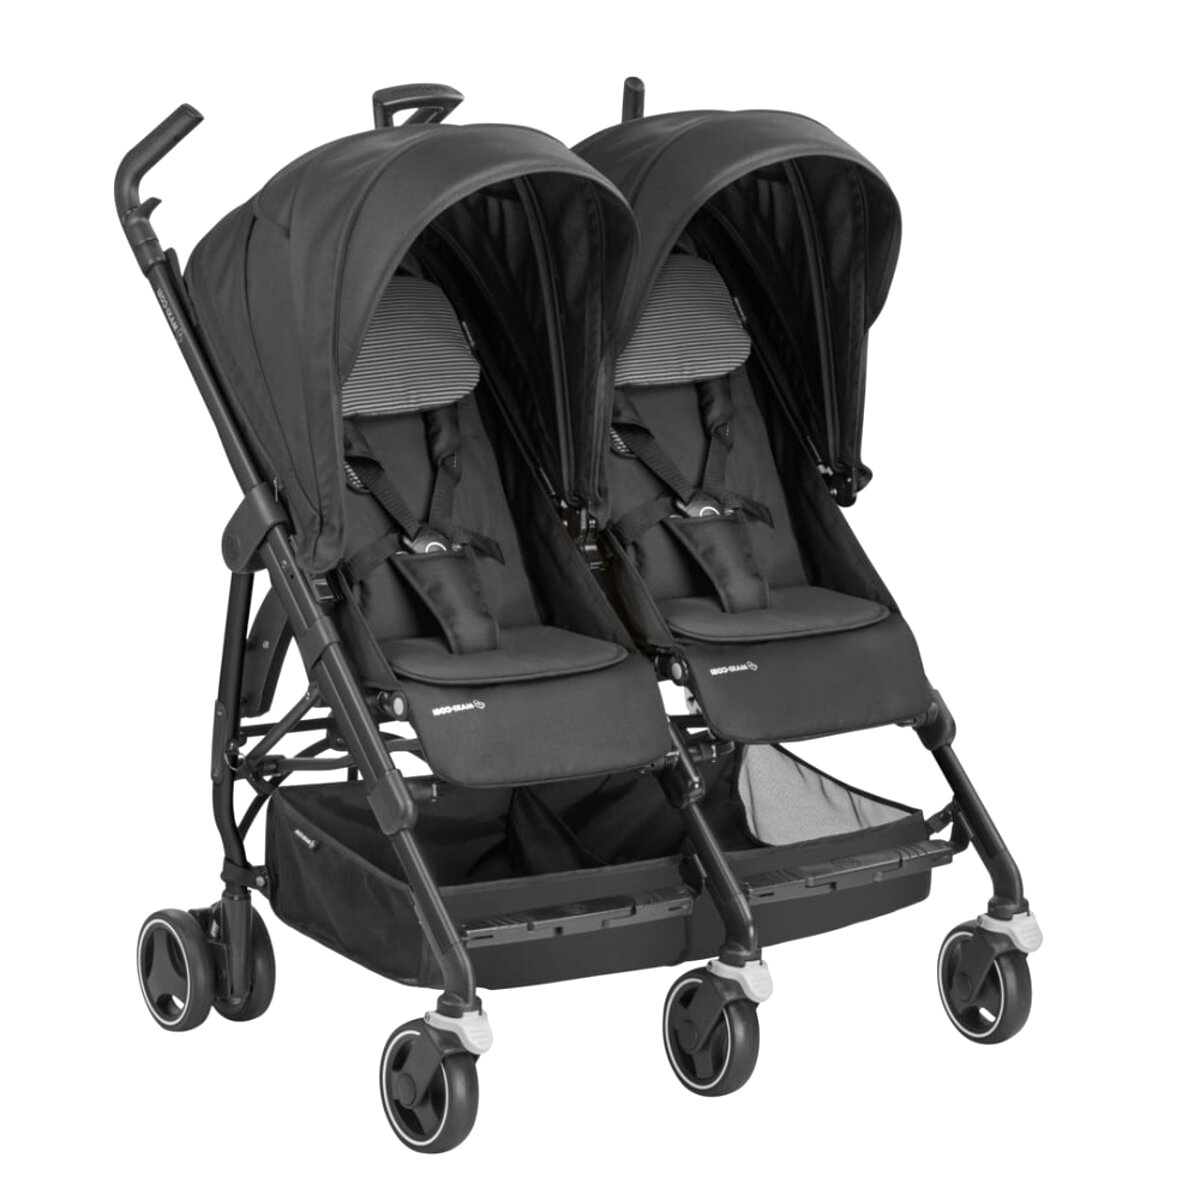 second hand twin pushchairs